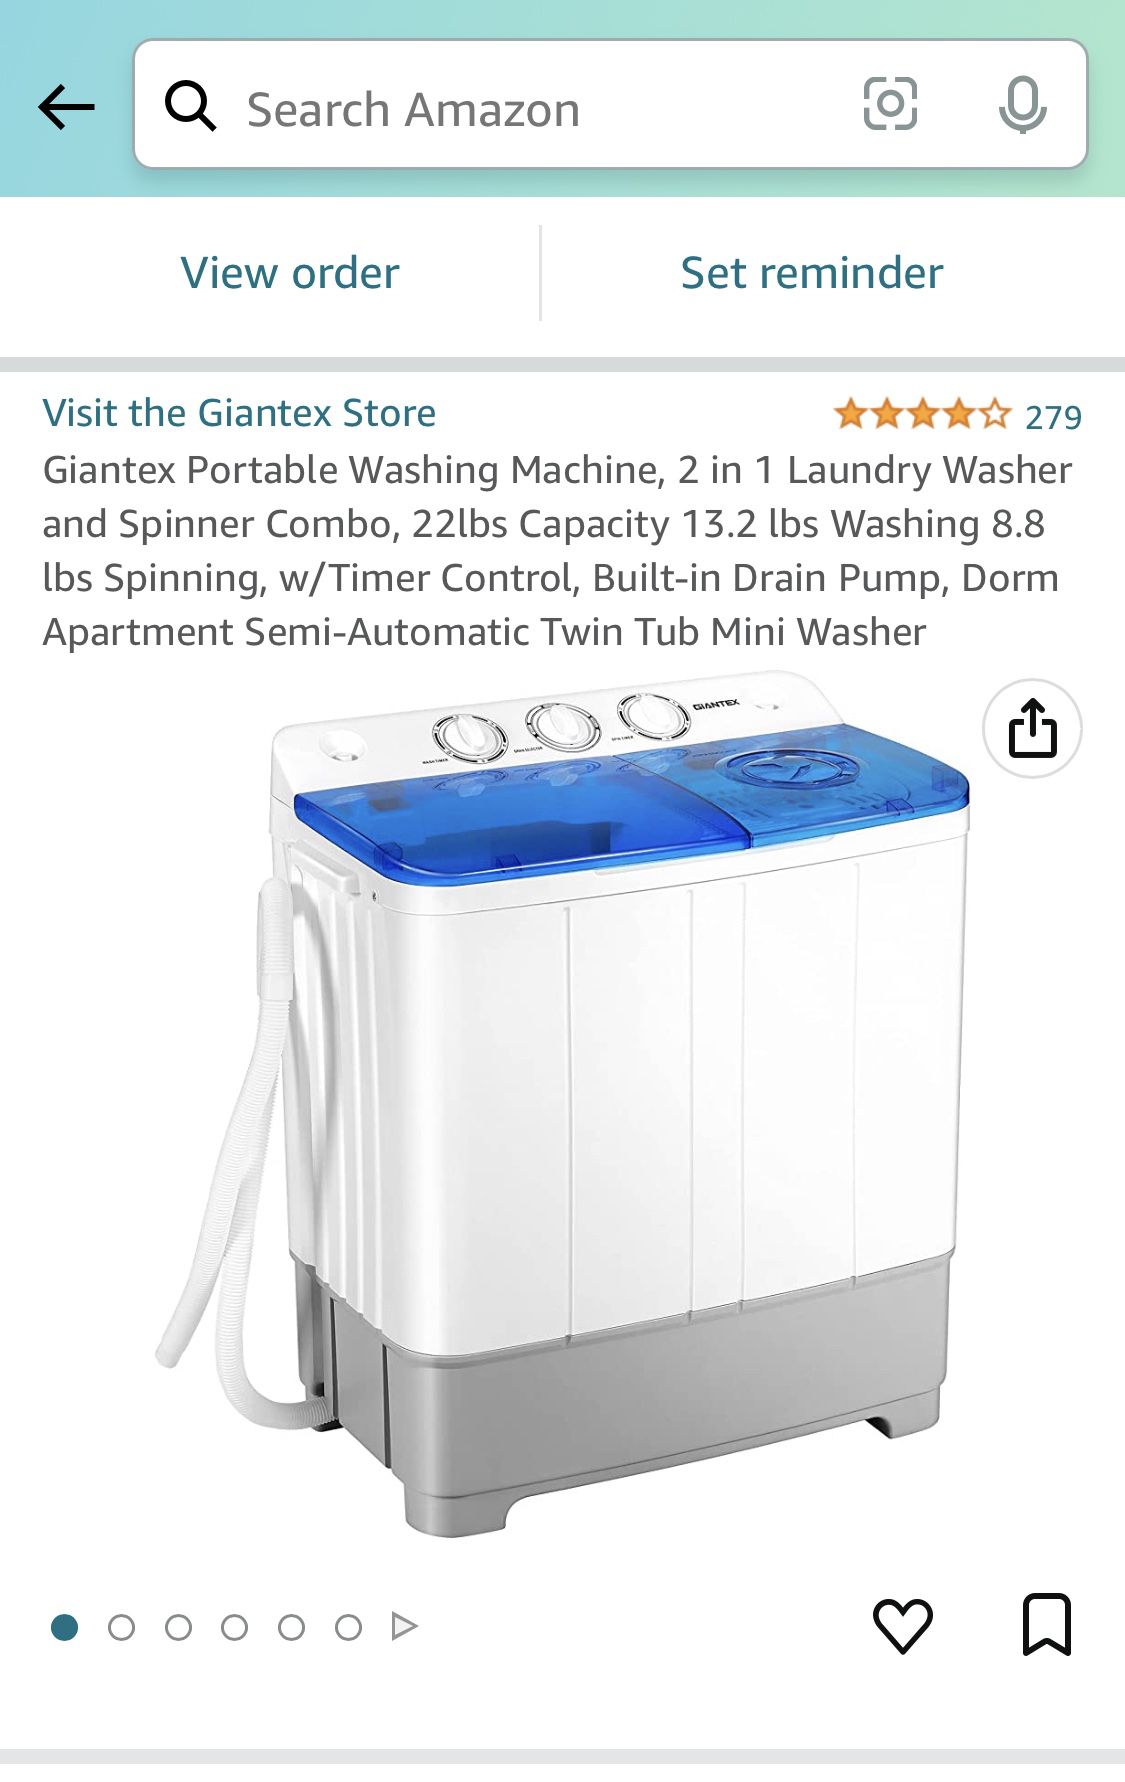 Giantex Portable Washing Machine, 2 in 1 Laundry Washer and Spinner Combo,  22lbs Capacity 13.2 lbs Washing 8.8 lbs Spinning, Timer Control, Drain